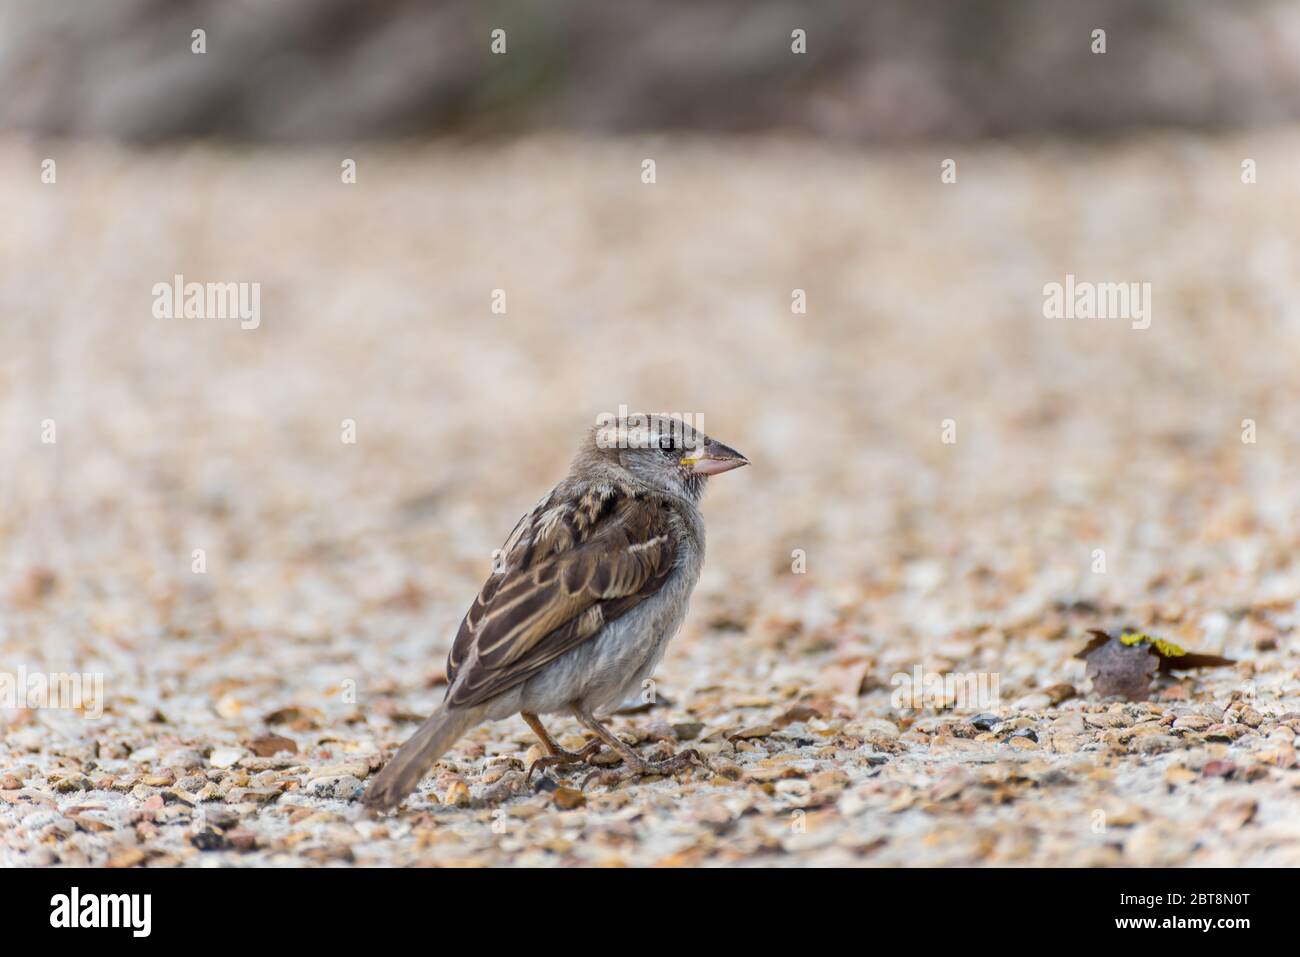 House sparrow, a bird of the sparrow family Passeridae found in Paris, France. Stock Photo